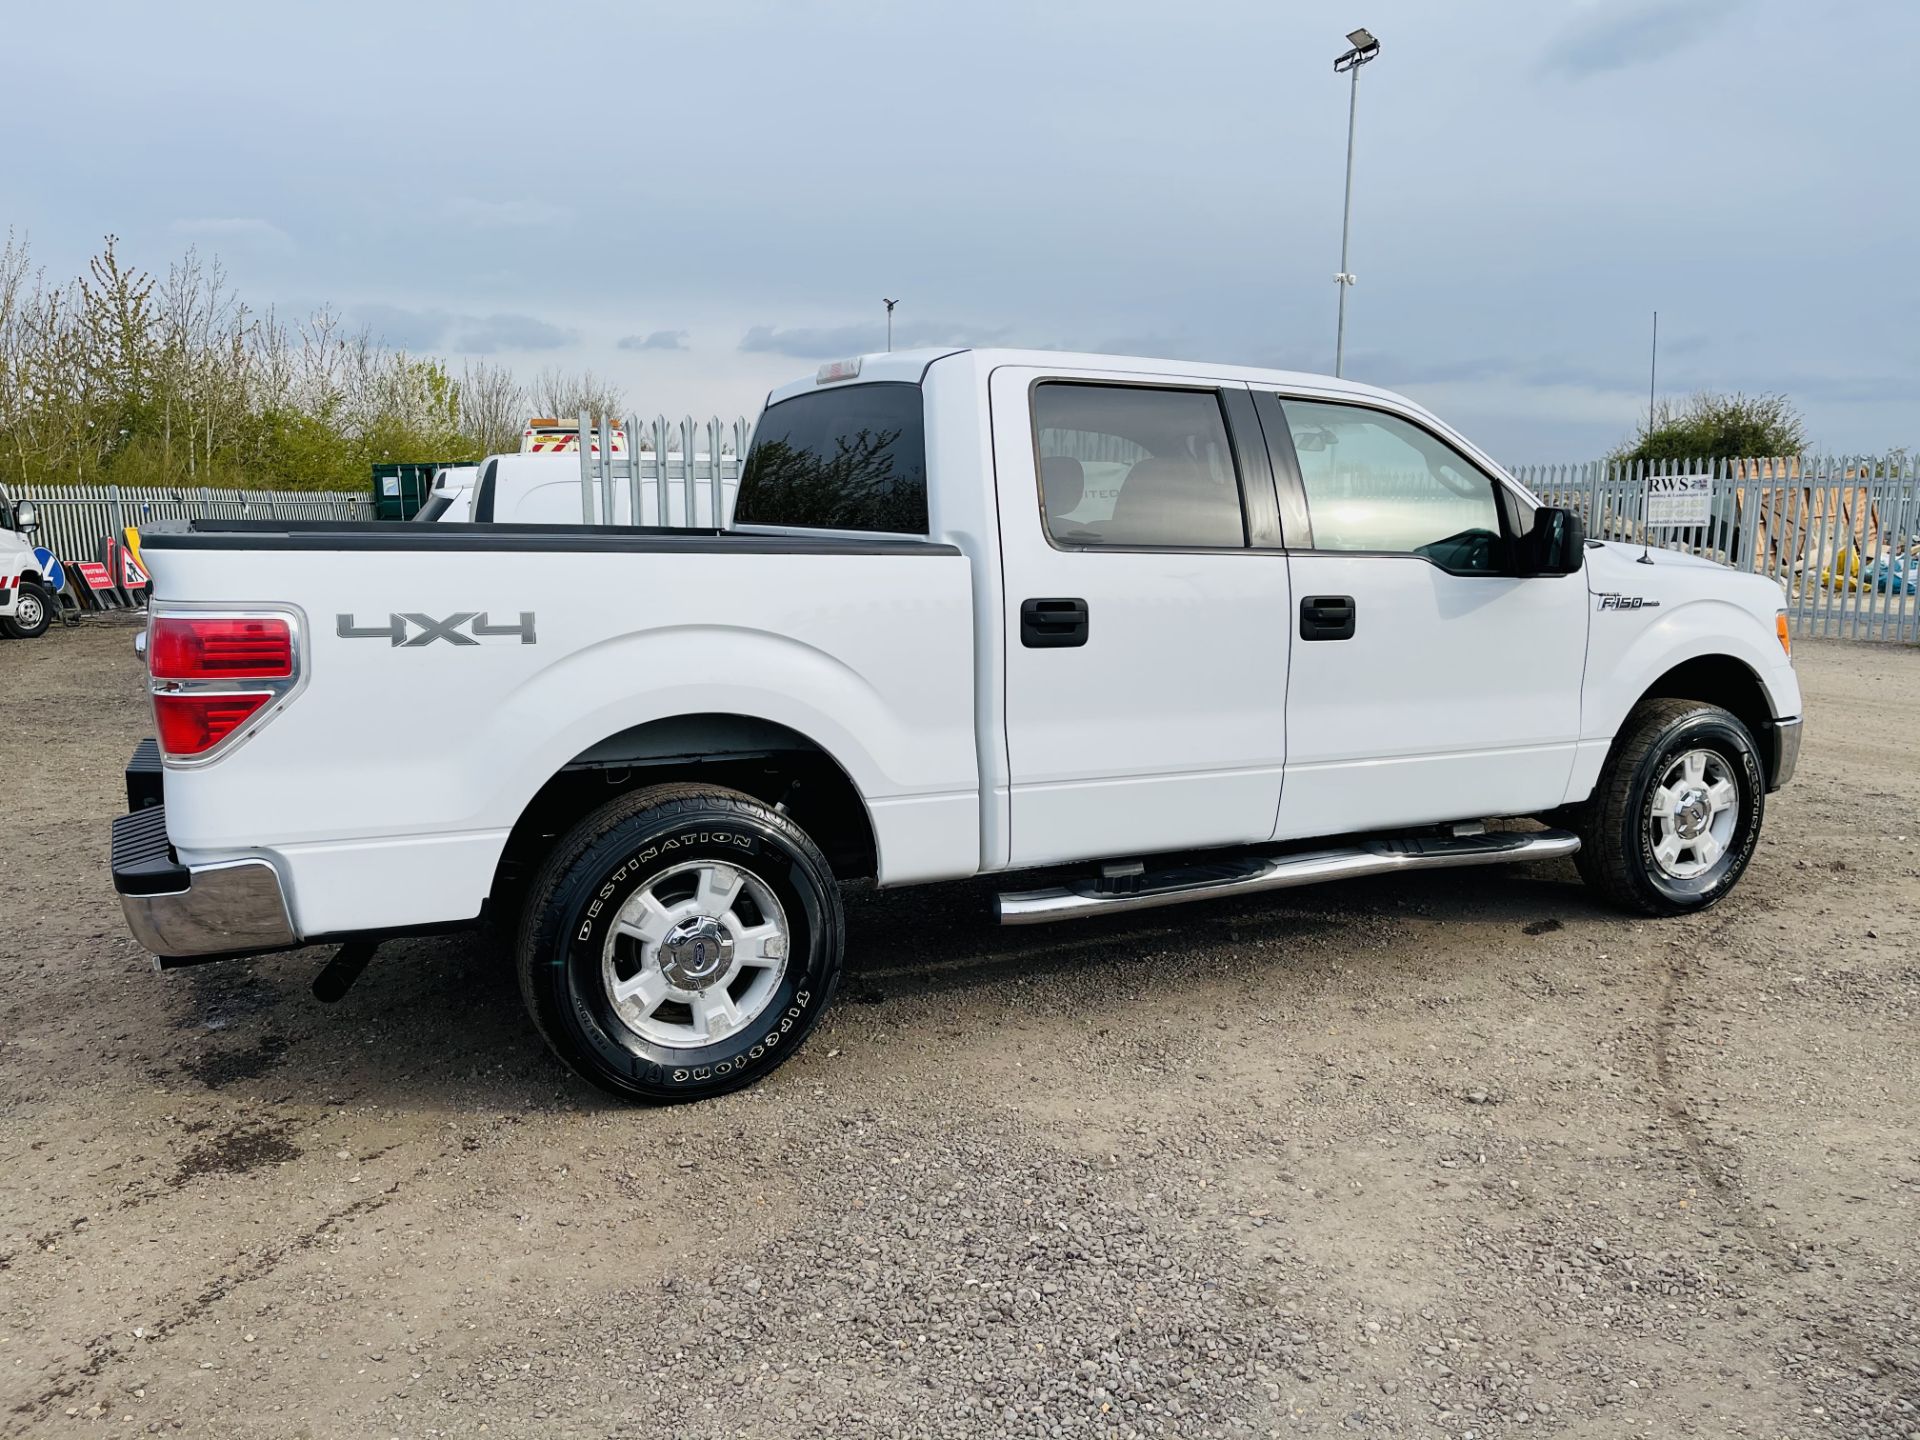 Ford F-150 XLT 4.6L V8 Super-crew 4WD 2010 ' 2010 Year' 6 Seats - Air con - NO RESERVE - Image 16 of 24